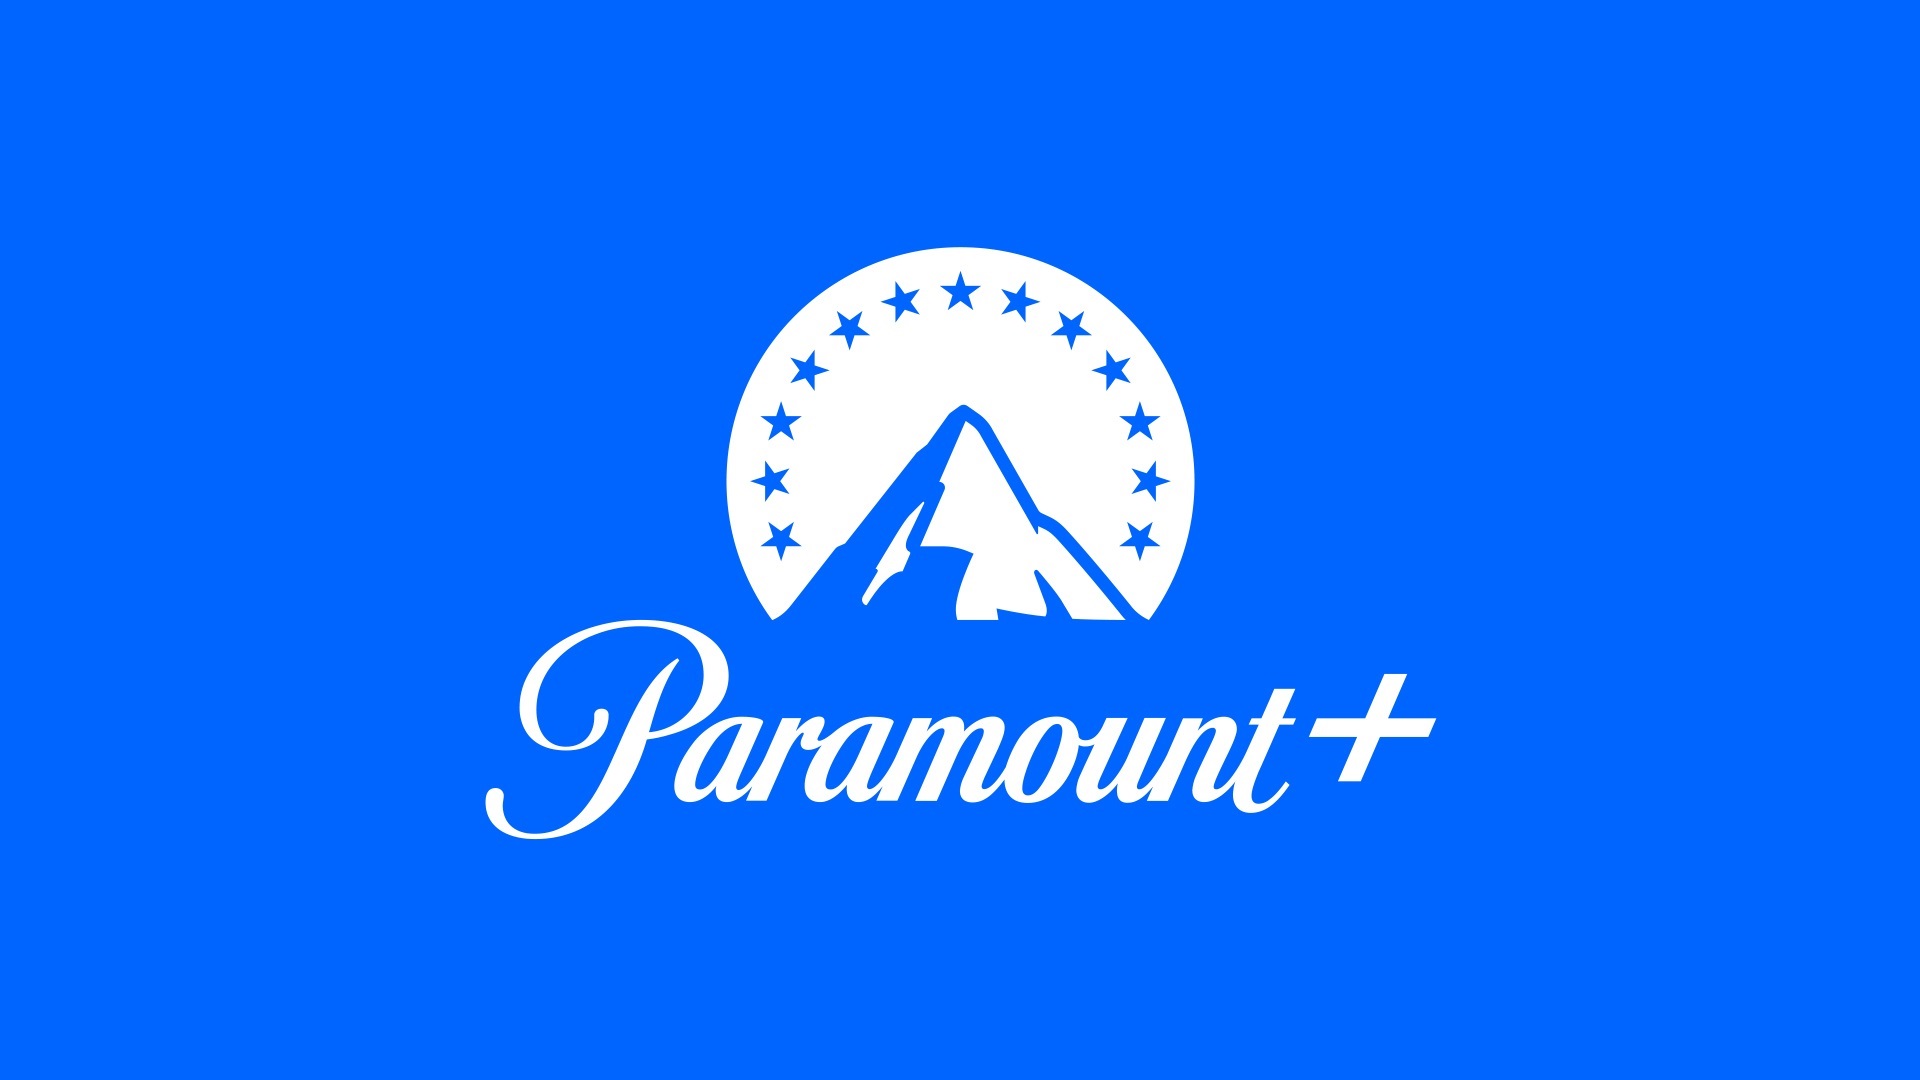 Paramount Plus announces price hike for later this year